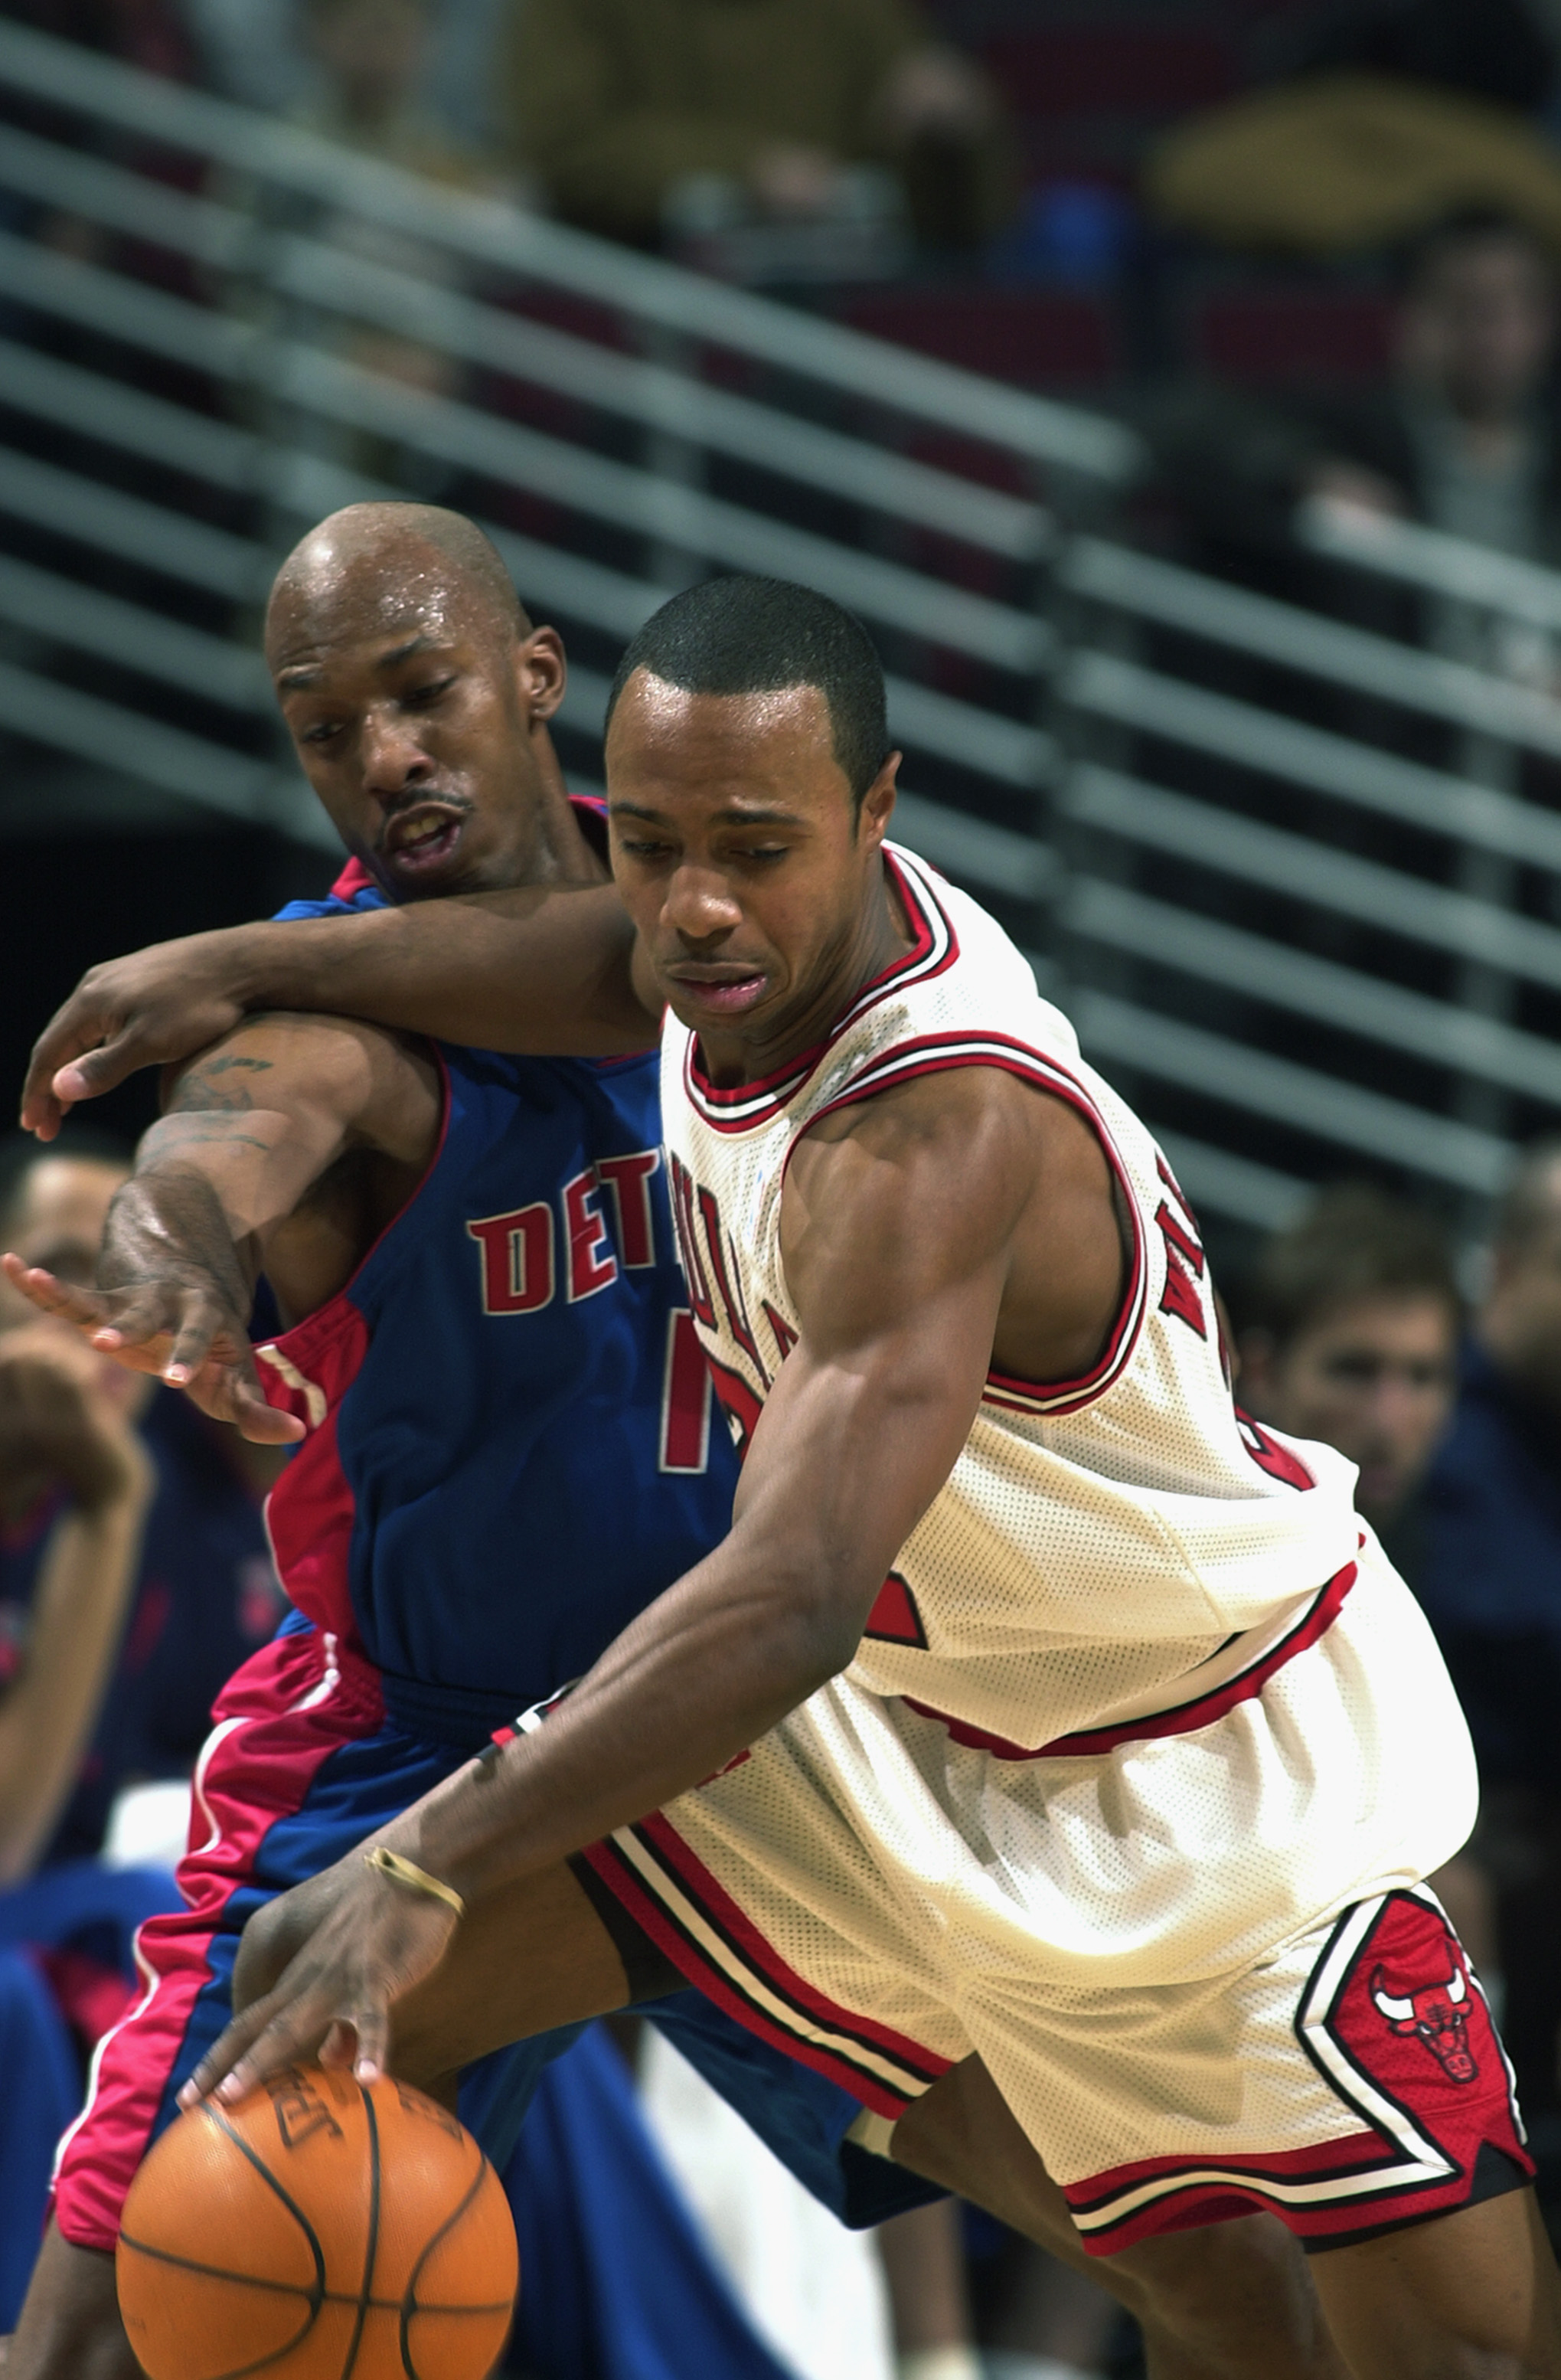 CHICAGO - DECEMBER 12:  Jay Williams #22 of the Chicago Bulls protects the ball during the NBA game against the Detroit Pistons at the United Center on December 12, 2002 in Chicago, Illinois. The Pistons won 86-76.  NOTE TO USER:  User expressly acknowled